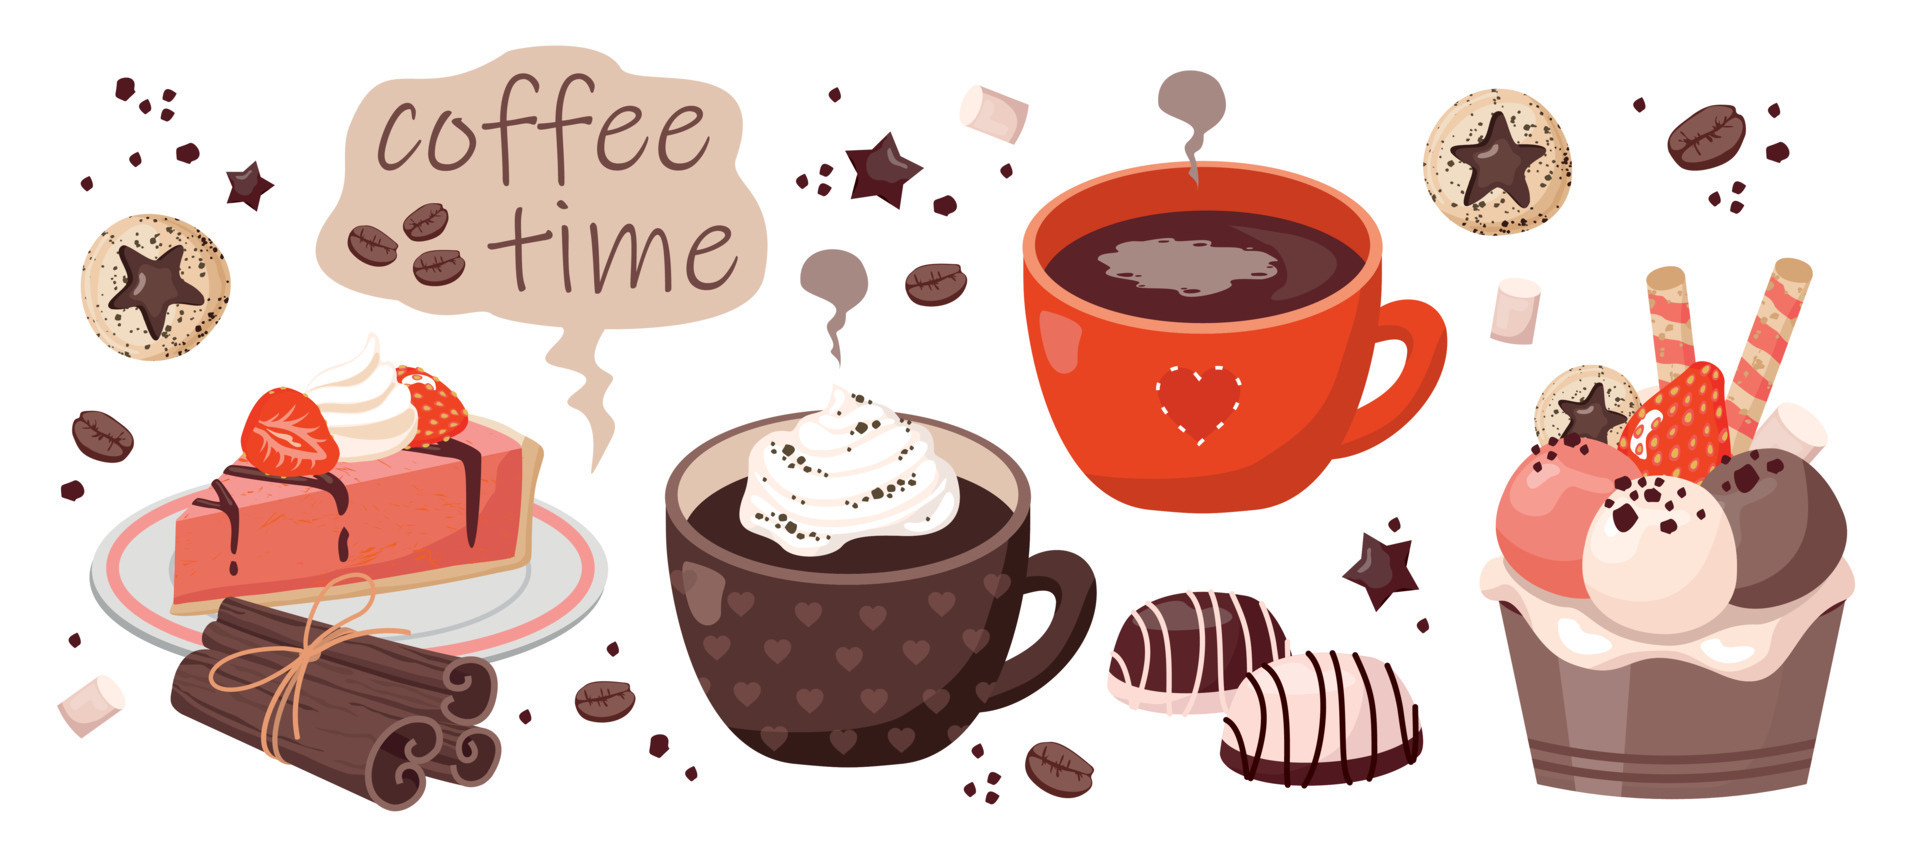 https://static.vecteezy.com/system/resources/previews/012/857/360/original/coffee-time-set-cup-of-coffee-cheesecake-strawberry-candy-cinnamon-ice-cream-balls-cookies-coffee-beans-vector.jpg